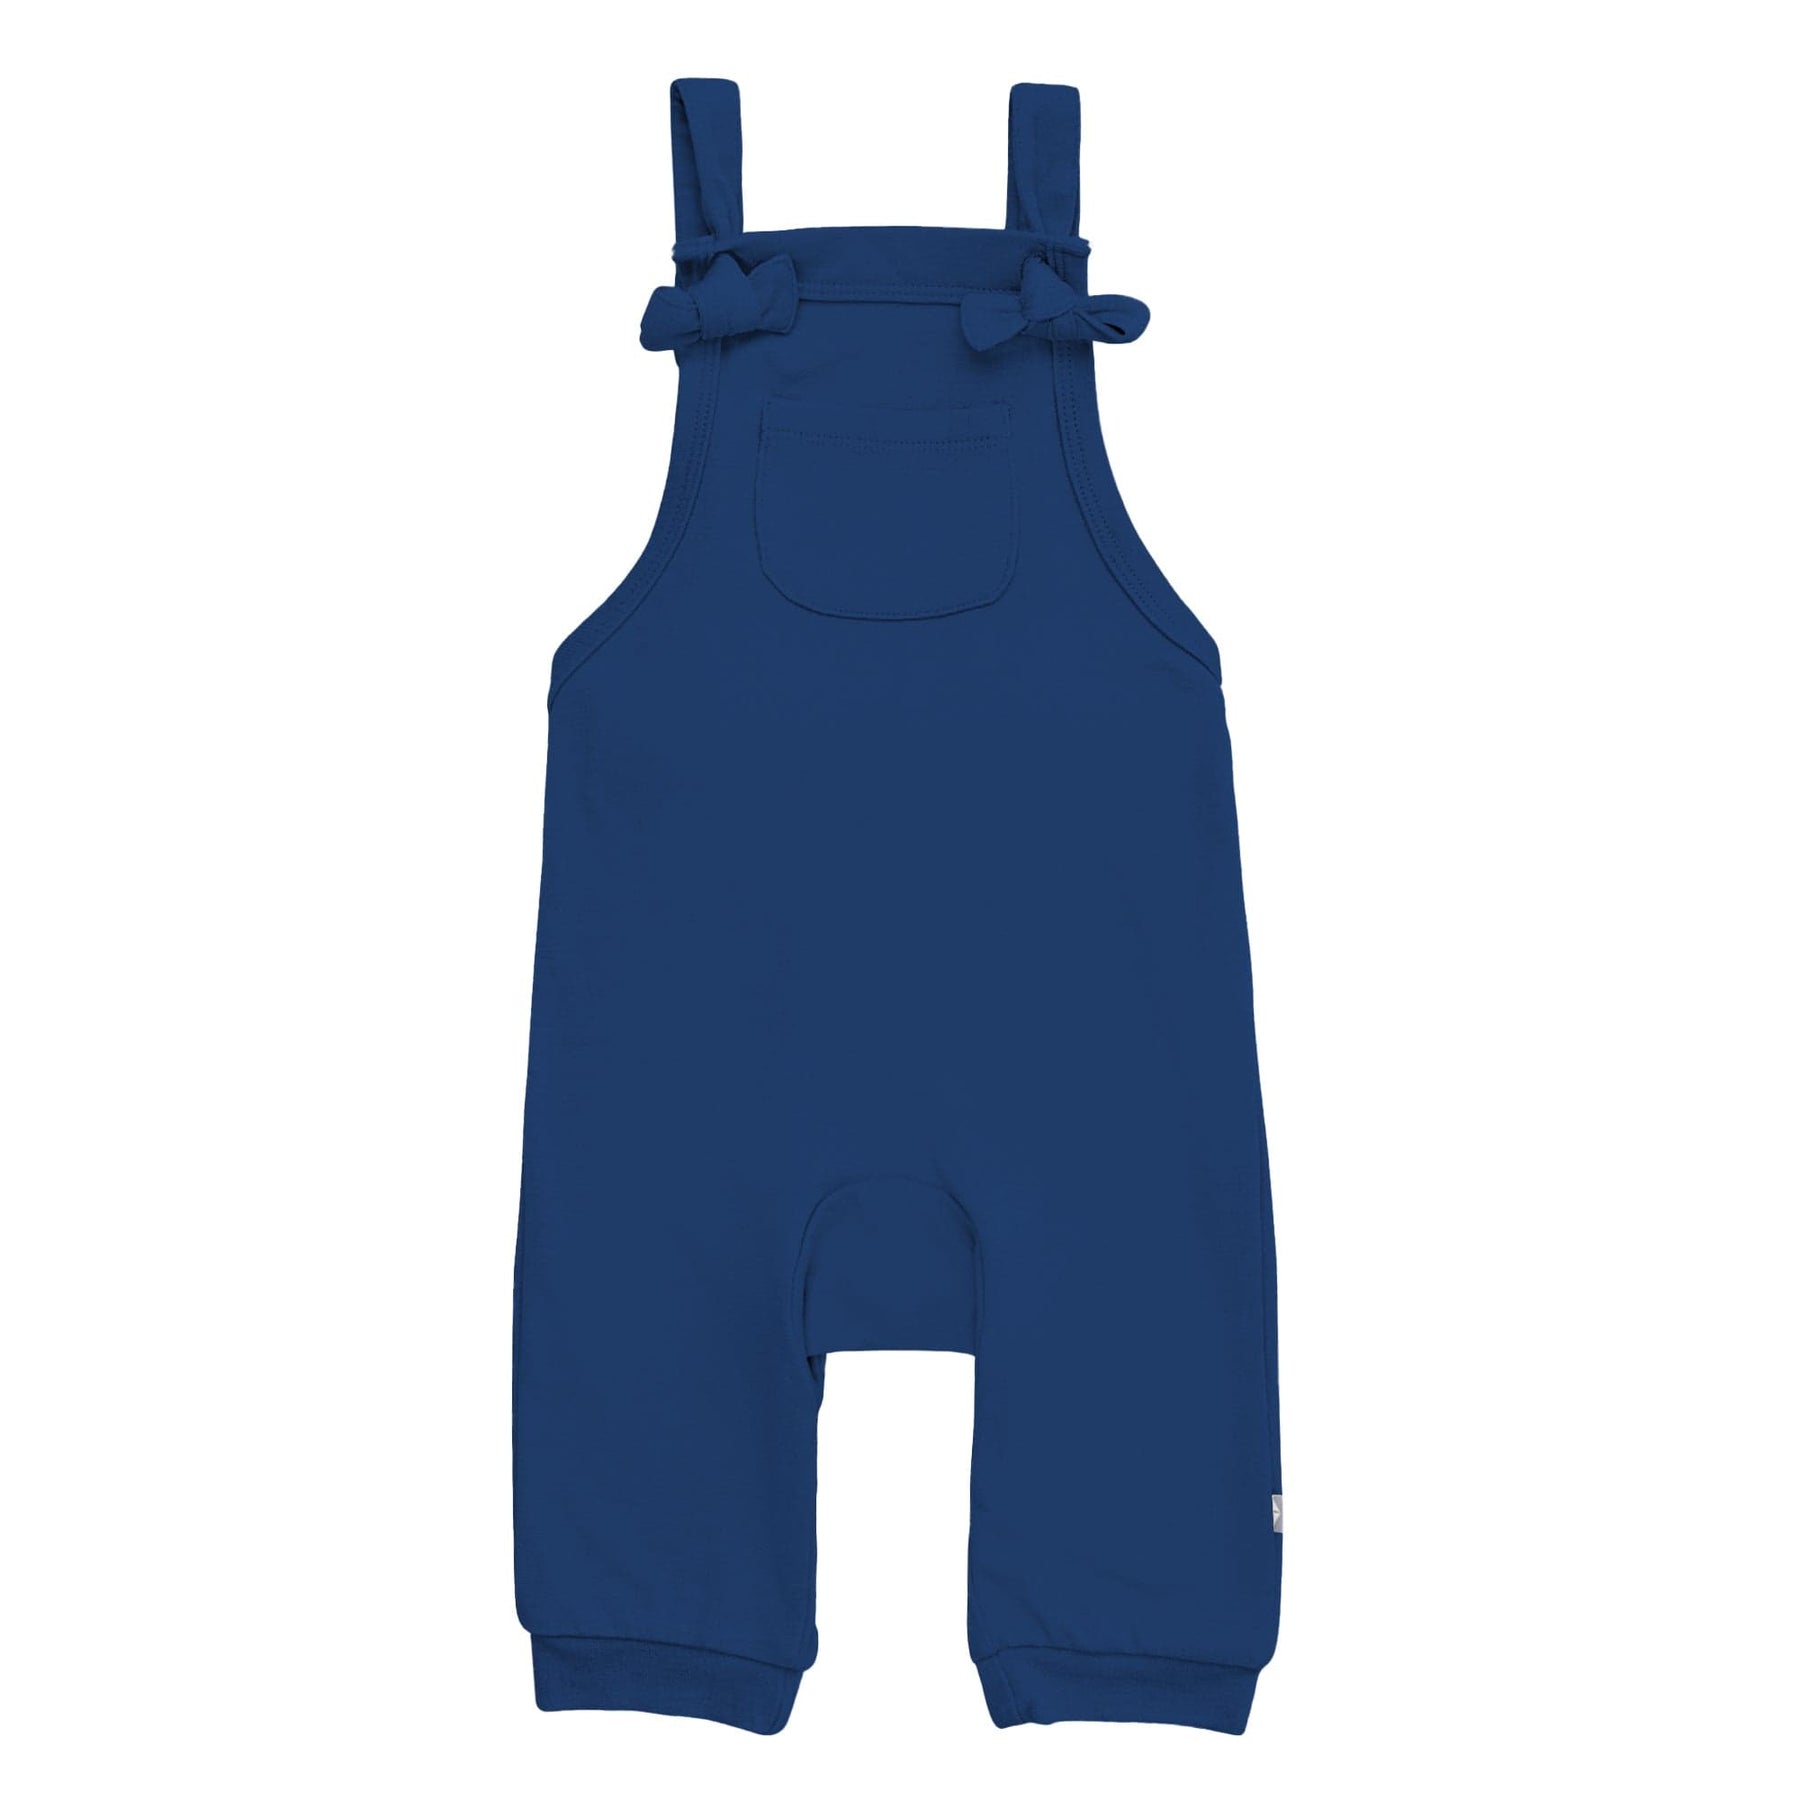 Jersey Dungarees & Top Set, View All Baby